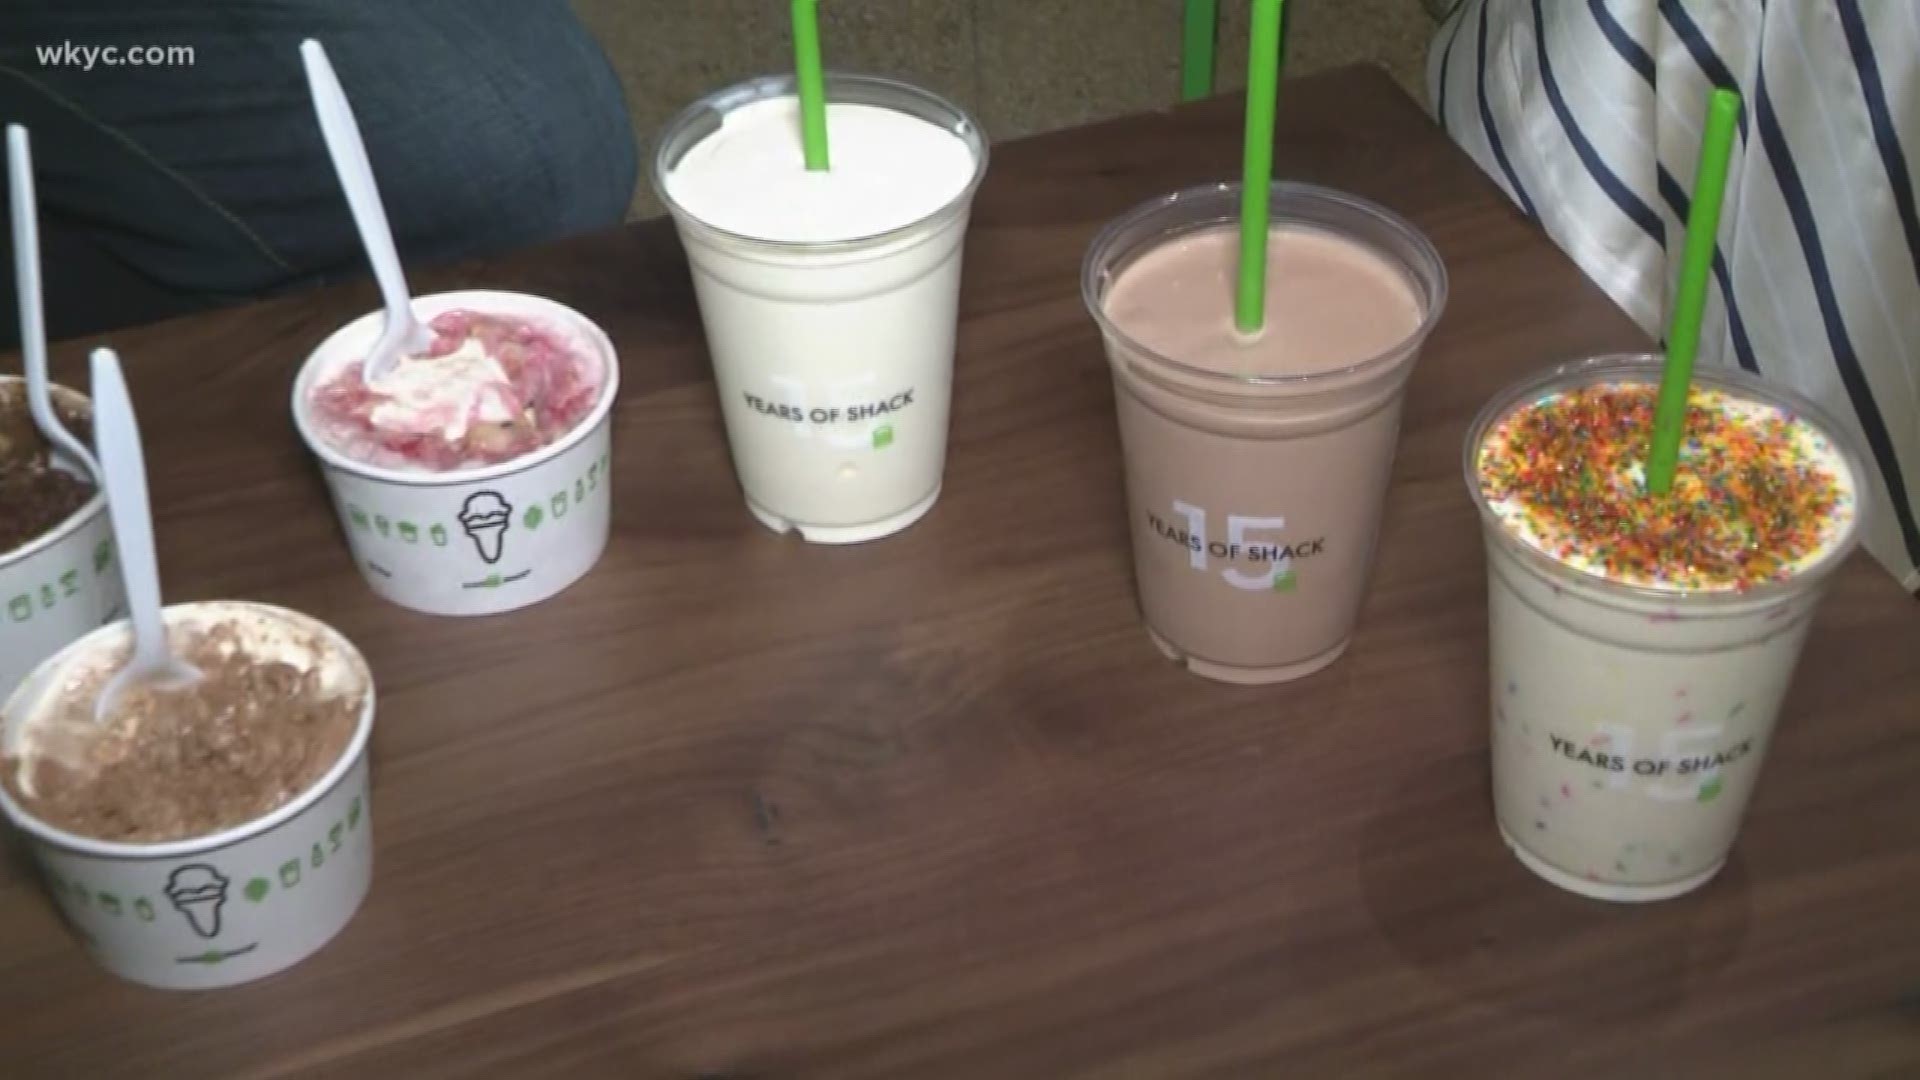 June 20, 2019: Yum! Shake Shack is known for its burgers, crinkle fries and unforgettable ShackSauce. But 'shake' is also in their name for a reason. Yep, the restaurant chain is also famous for their milkshakes, which we explore at the brand new downtown Cleveland location.